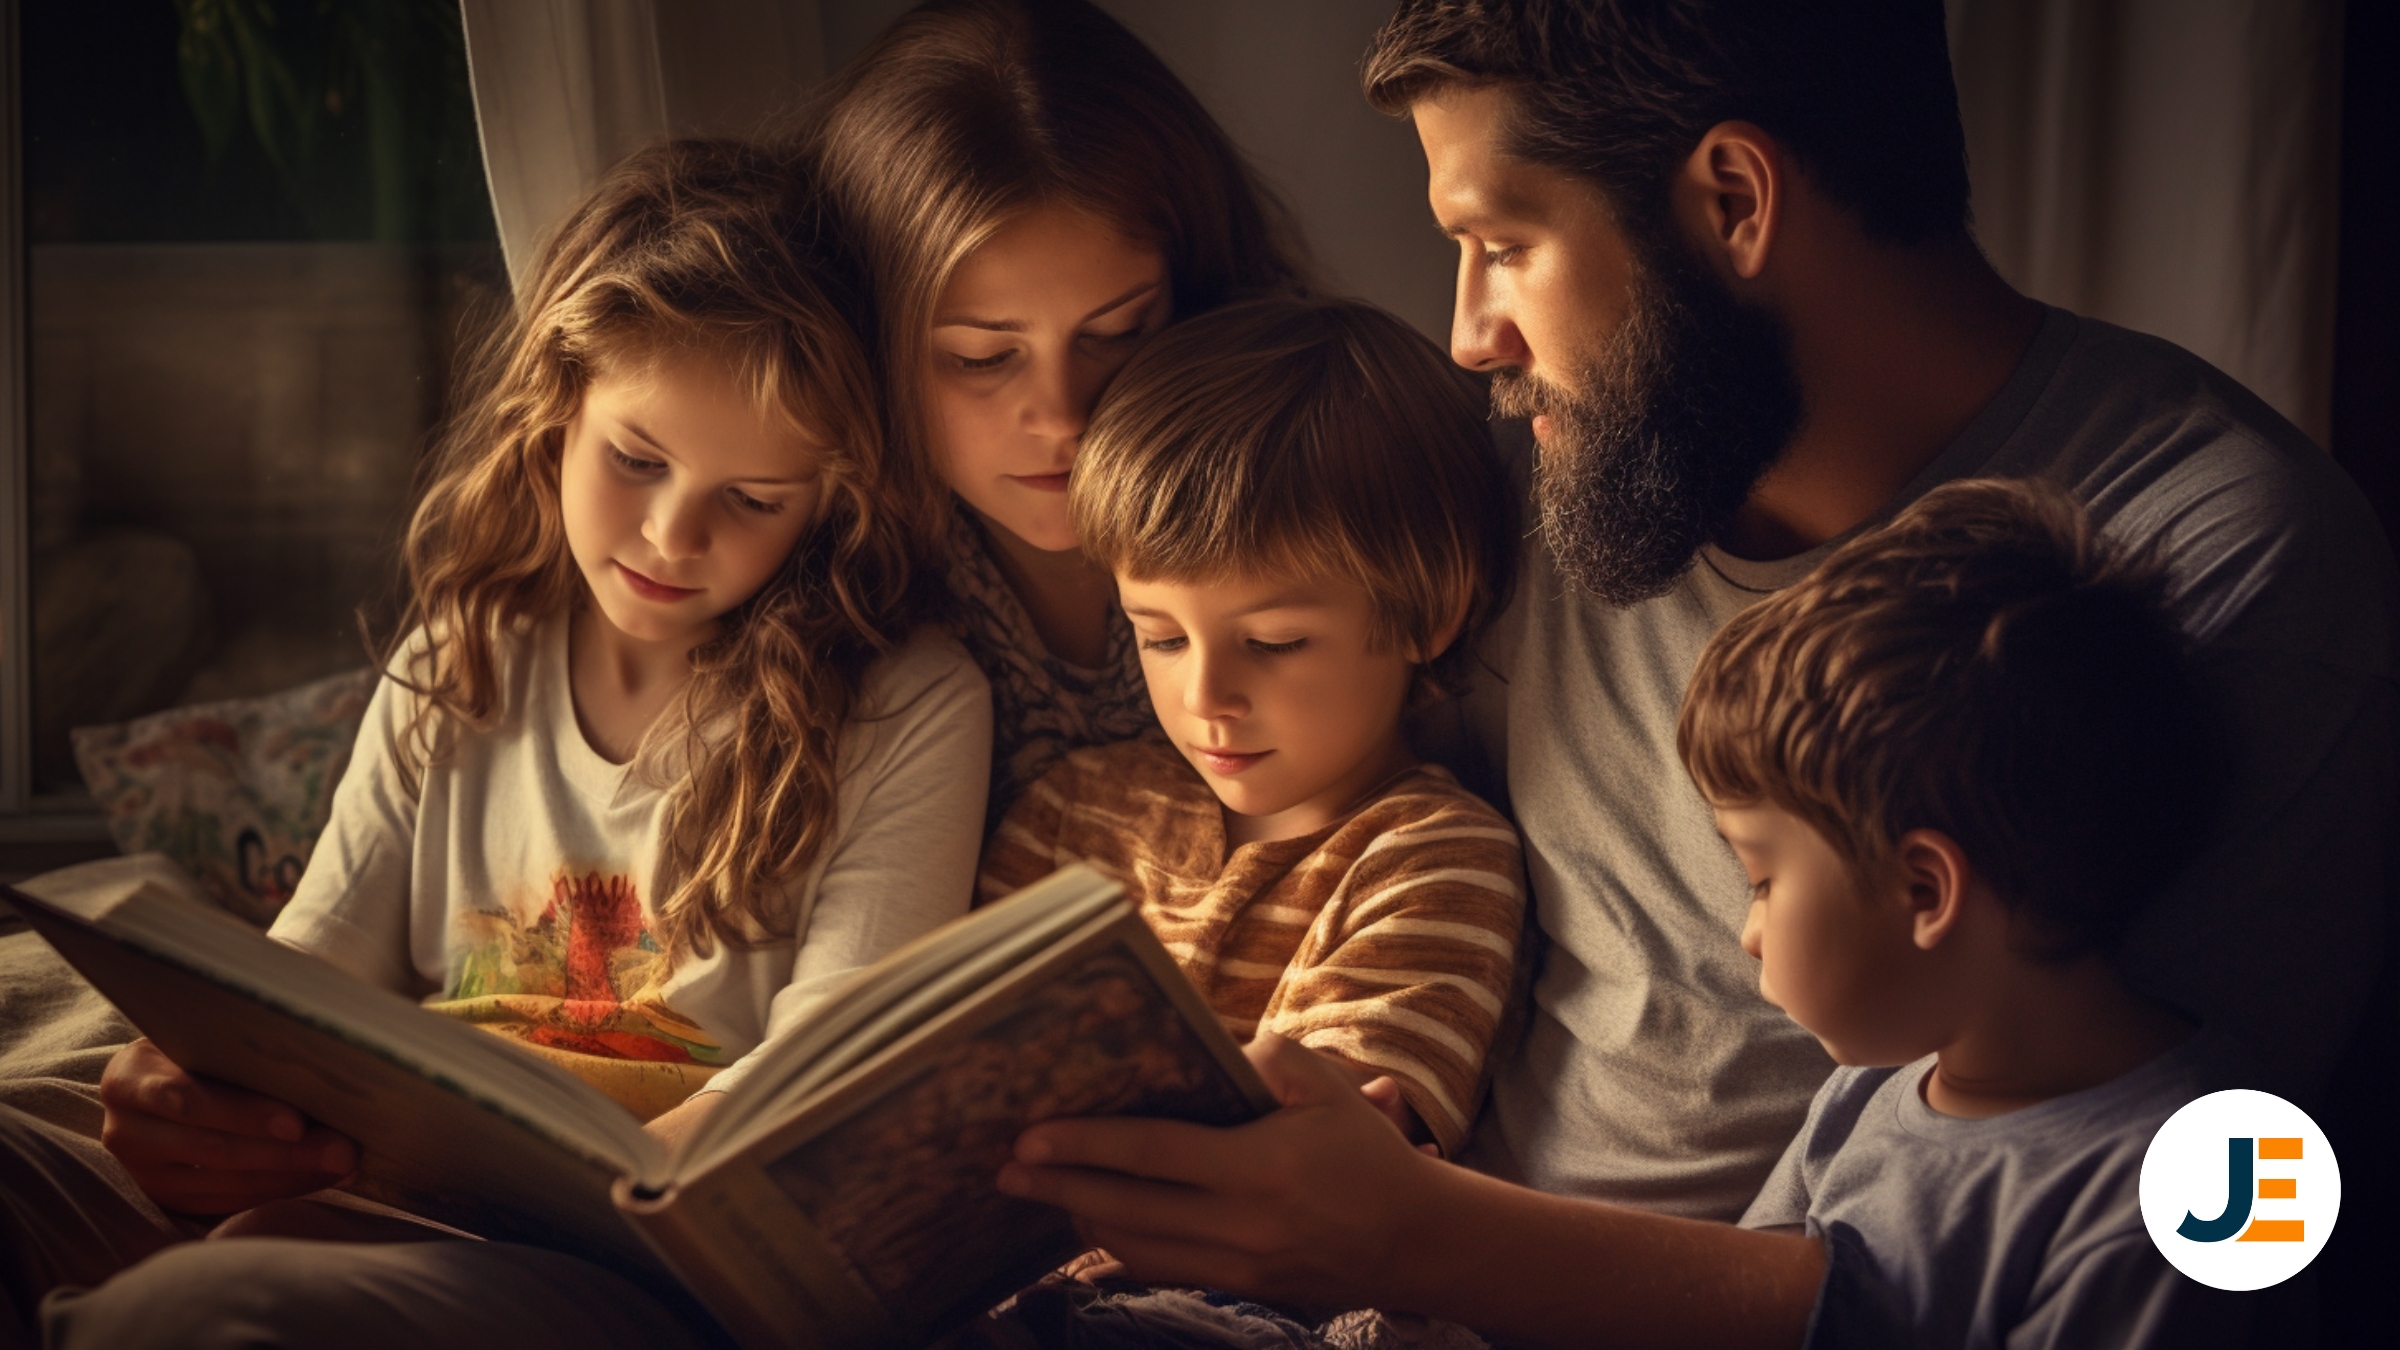 A pronomian mother and father reading a book with their children, one daughter and two sons